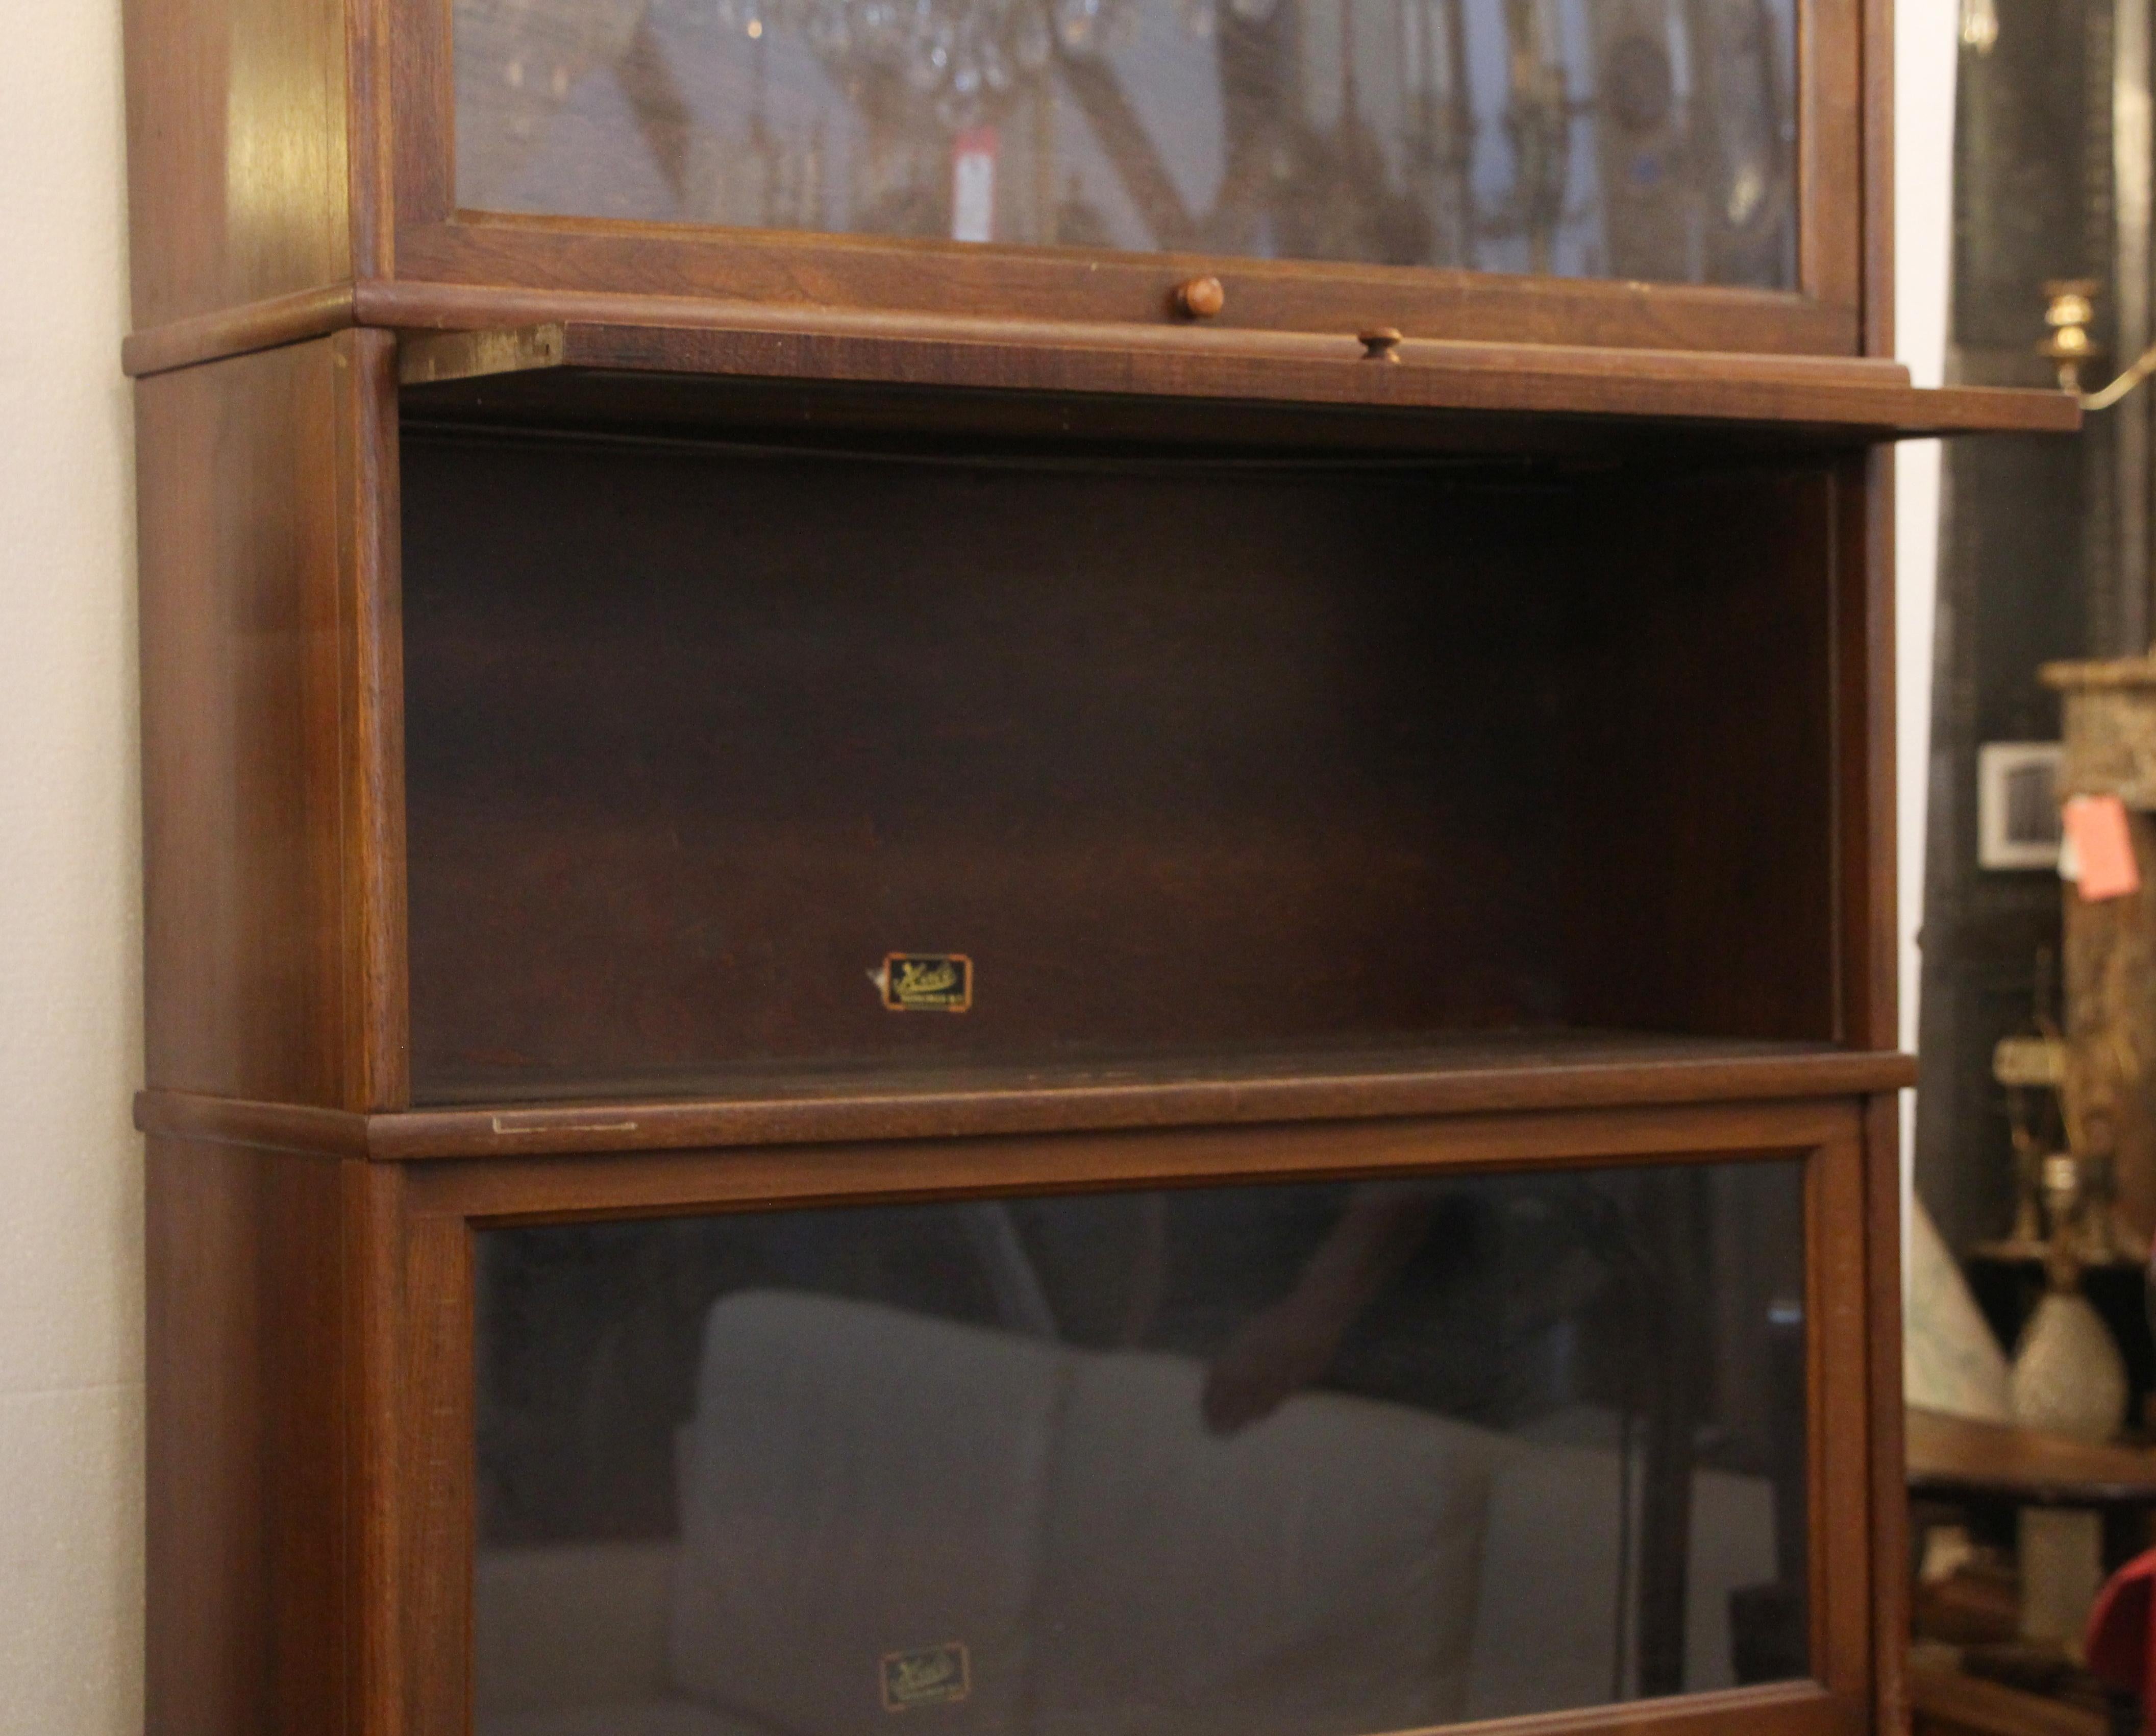 Five-section dark wood tone barrister bookcase with pull out glass doors from the 1920s. Made by Hale. This can be seen at our 2420 Broadway location on the upper west side in Manhattan.